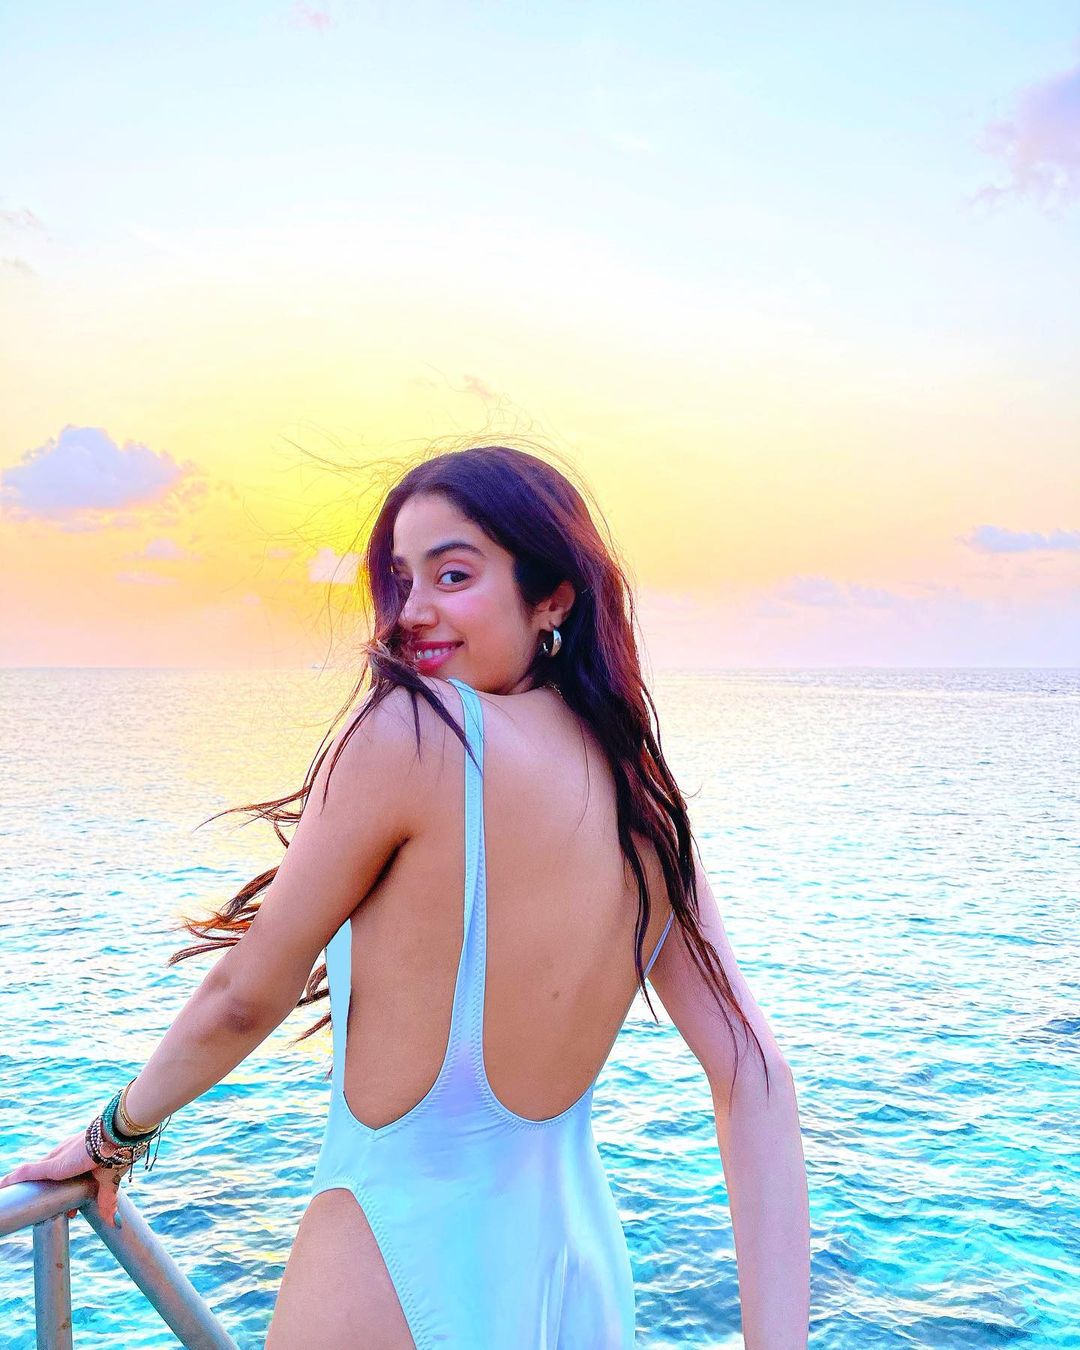  Janhvi Kapoor's shiny swimsuit is apt for the summers. (Image: Instagram)